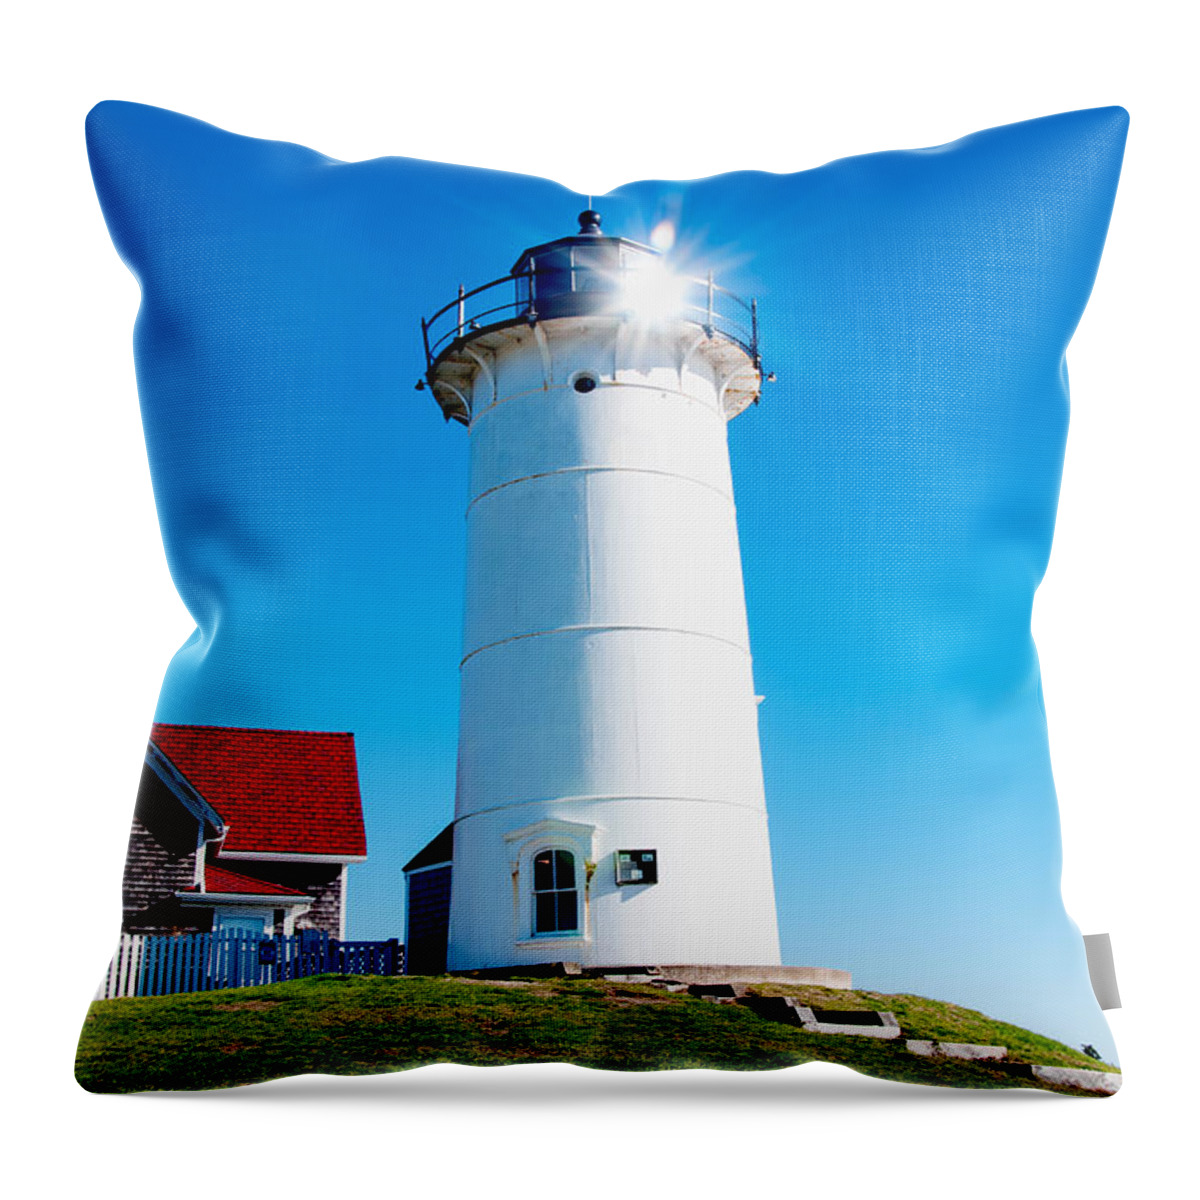 Cape Cod Throw Pillow featuring the photograph Solar Lighthouse by Greg Fortier